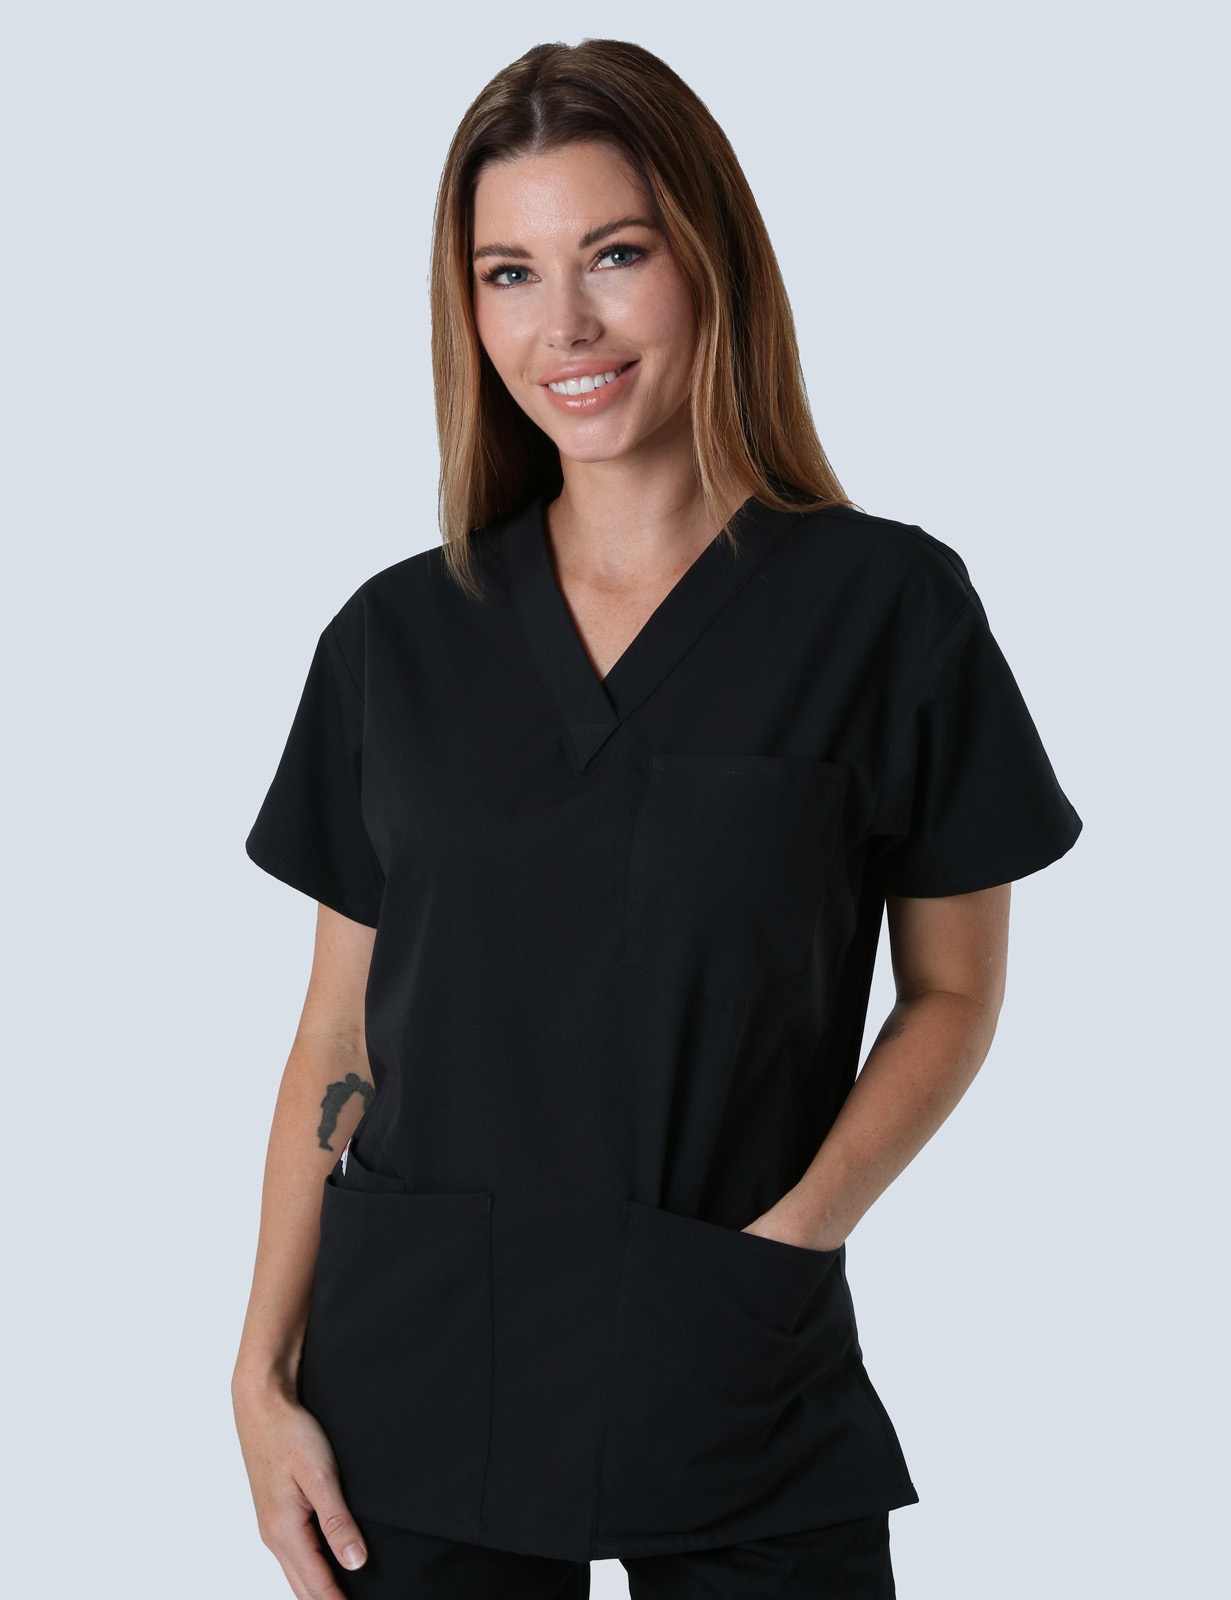 RBWH - Grantley Stable Neonatal (4 Pocket Scrub Top and Cargo Pants in Black incl Logos)